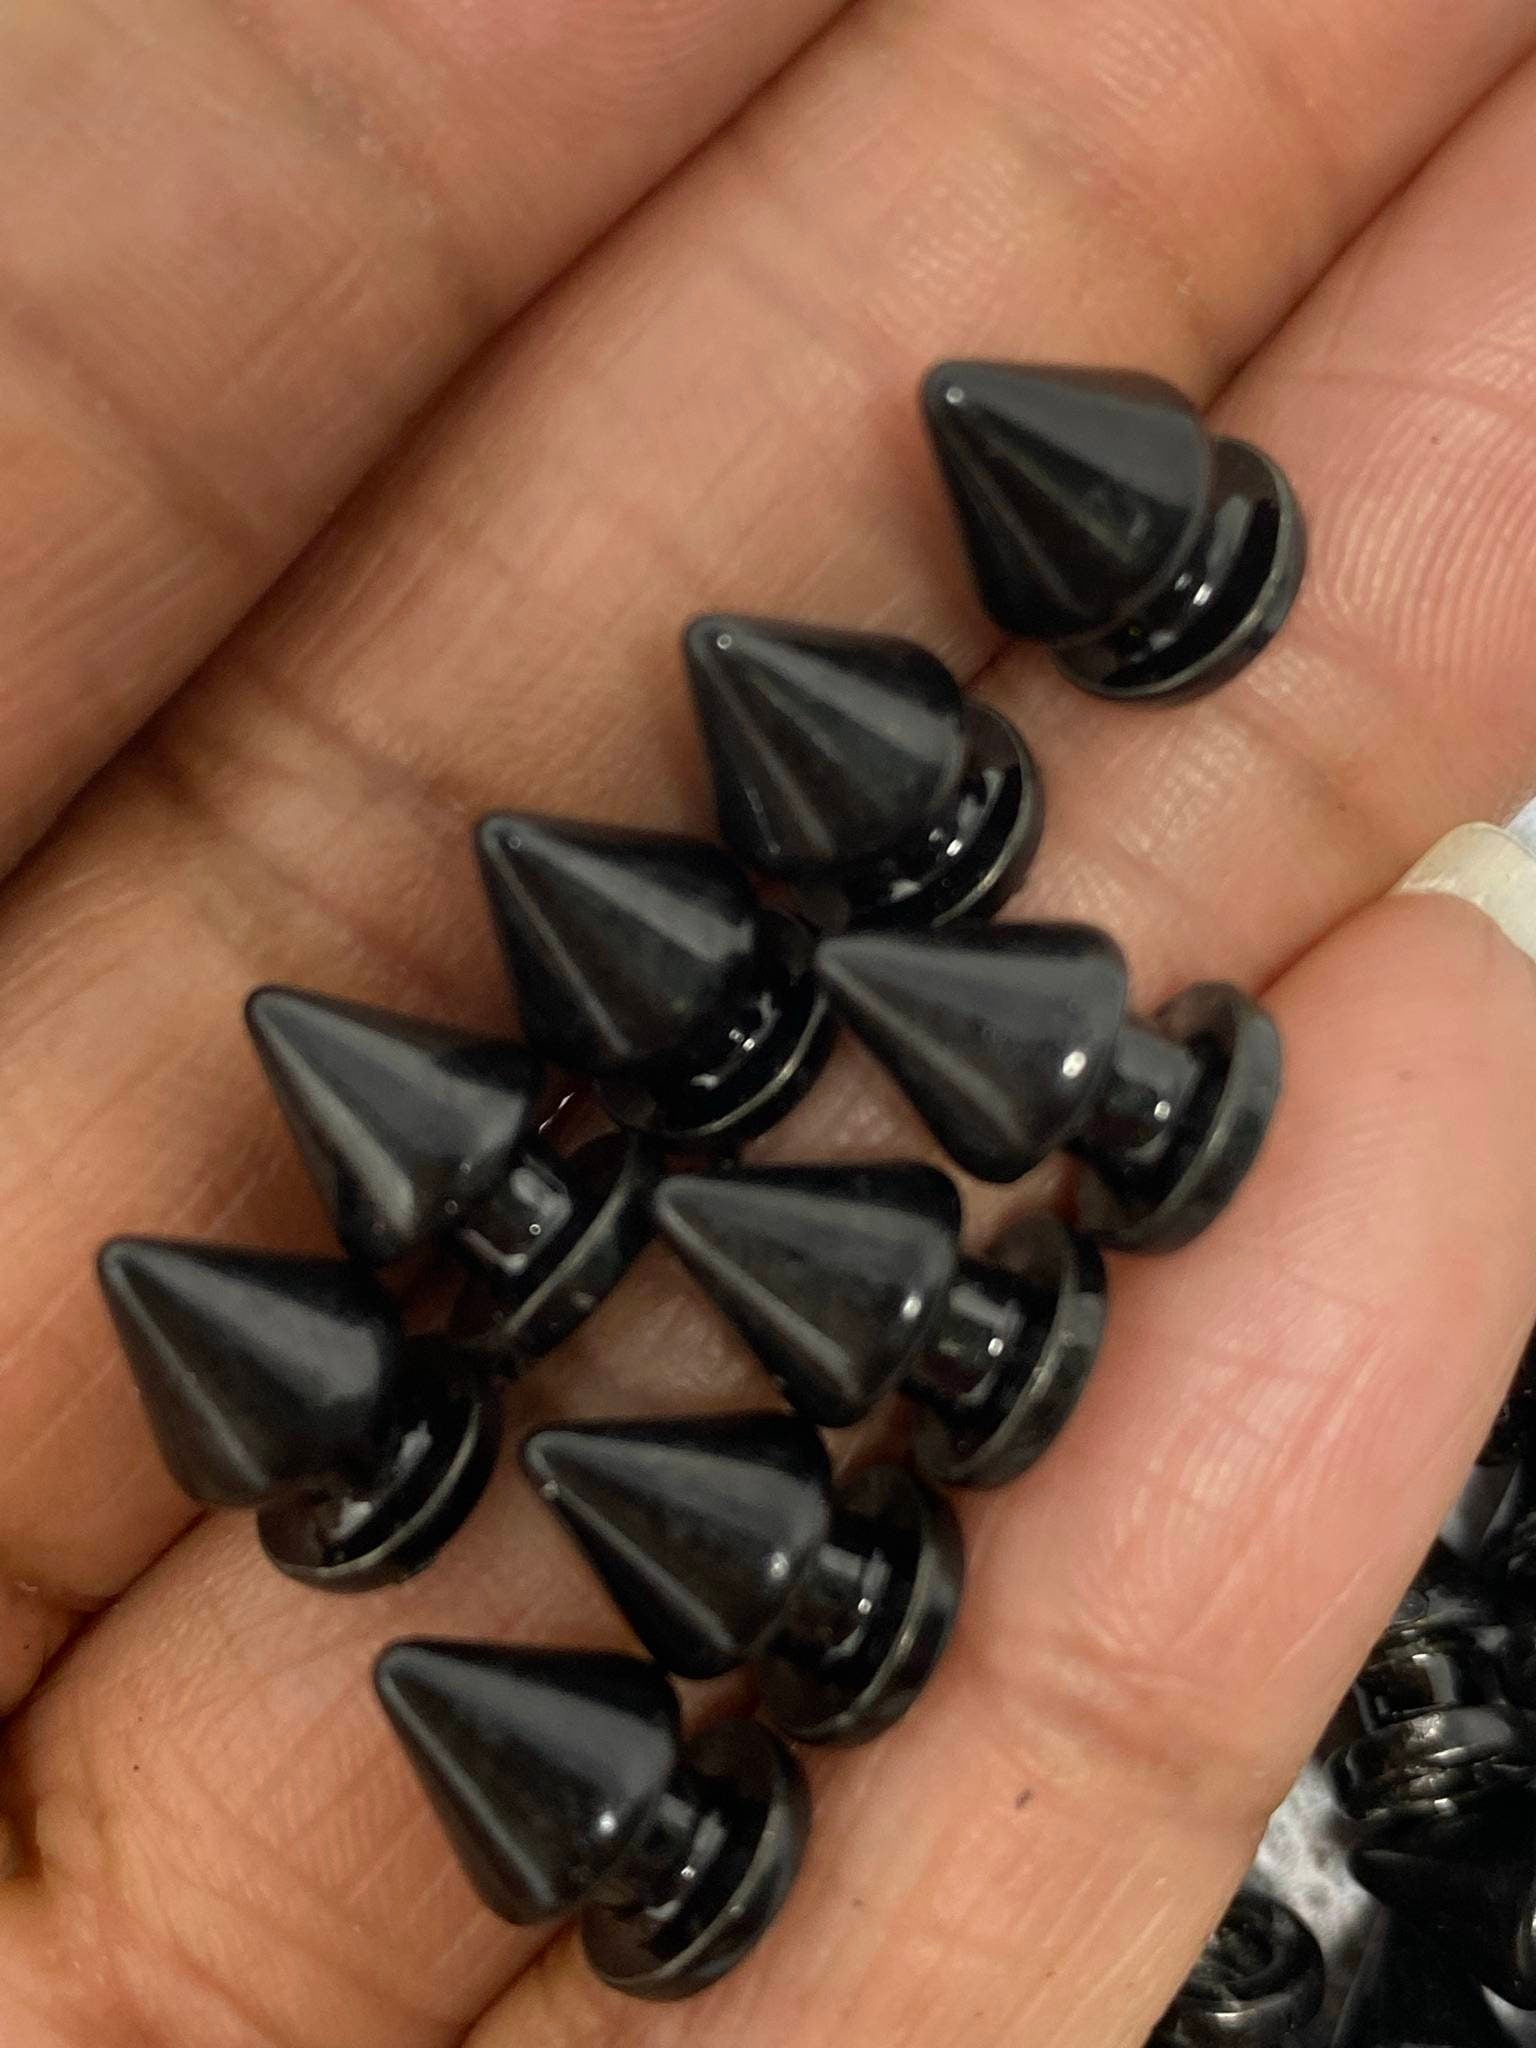 New,Black Spikes, 12mm, 100-pcs, Spikes w/Screws, Small Cone Spikes –  PatchPartyClub